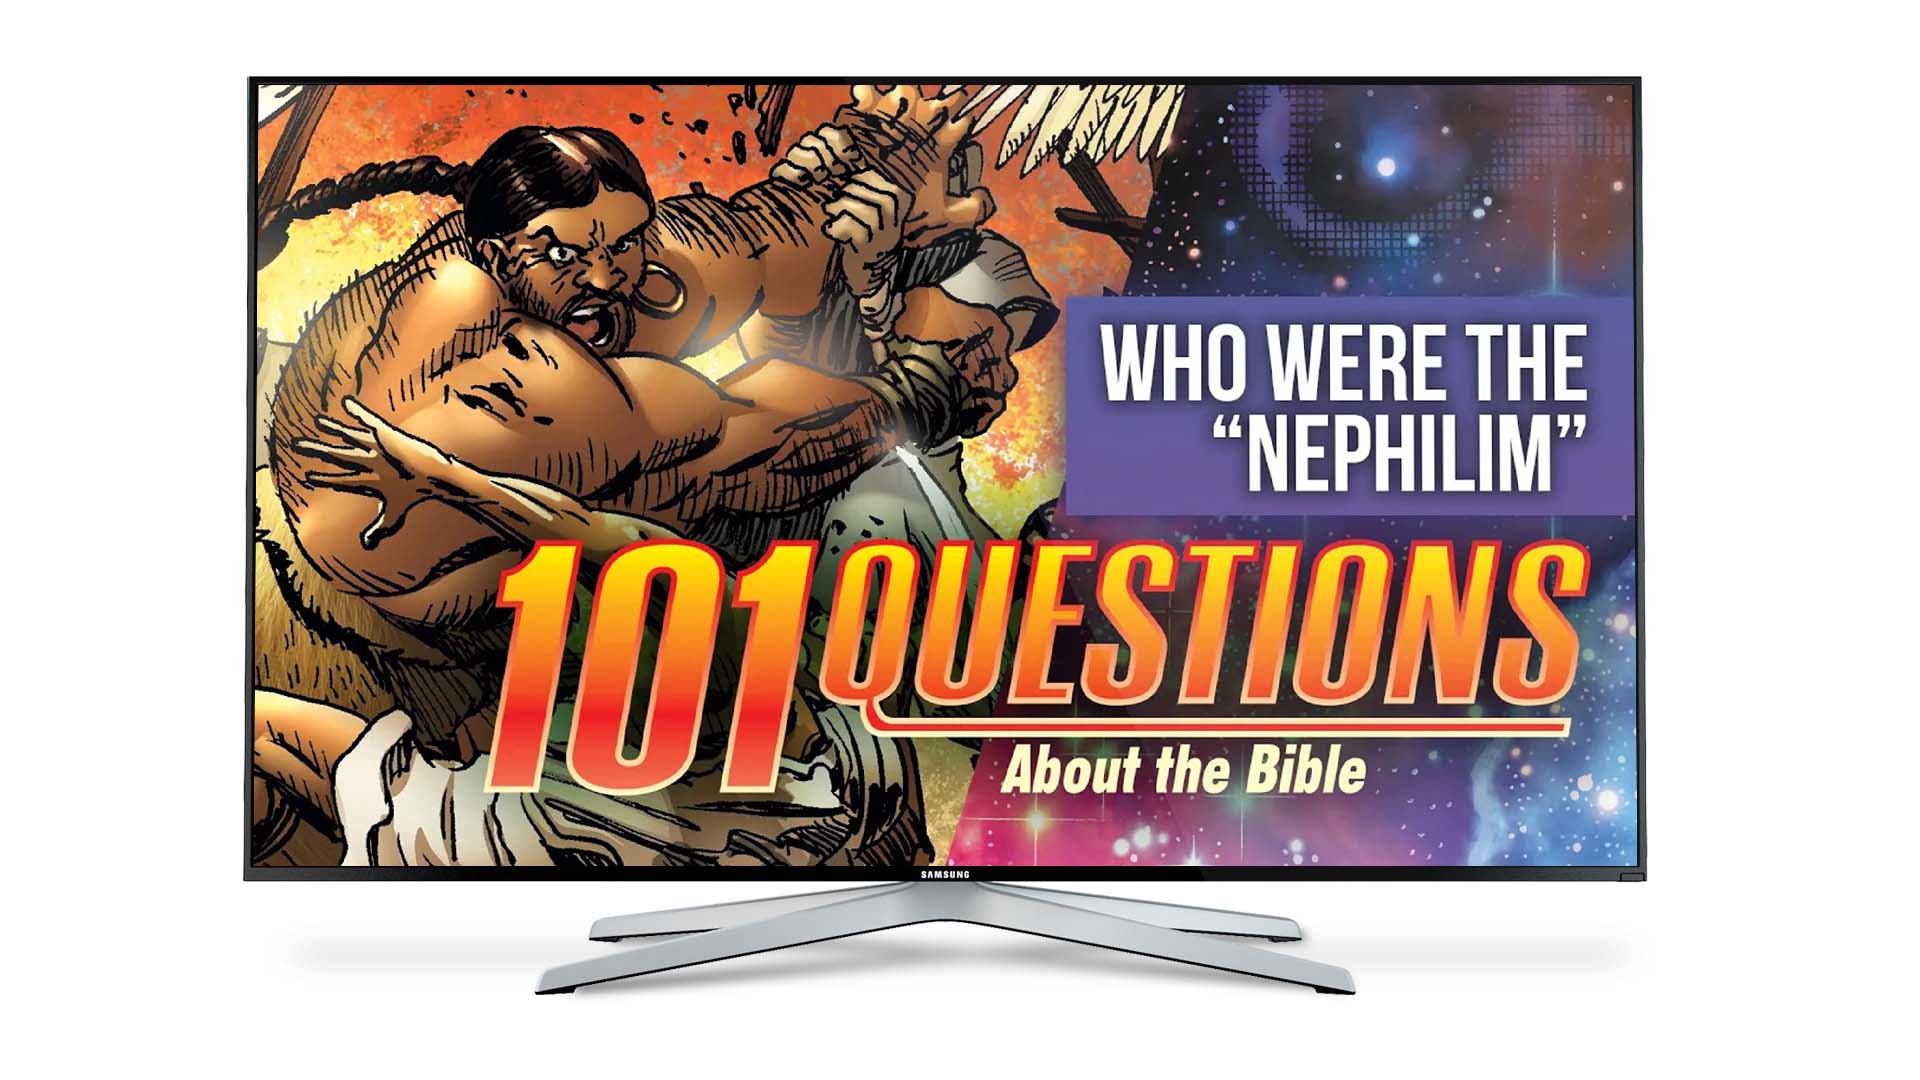 Motion Comic: 101 Questions #8 - Who were the Nephilim?